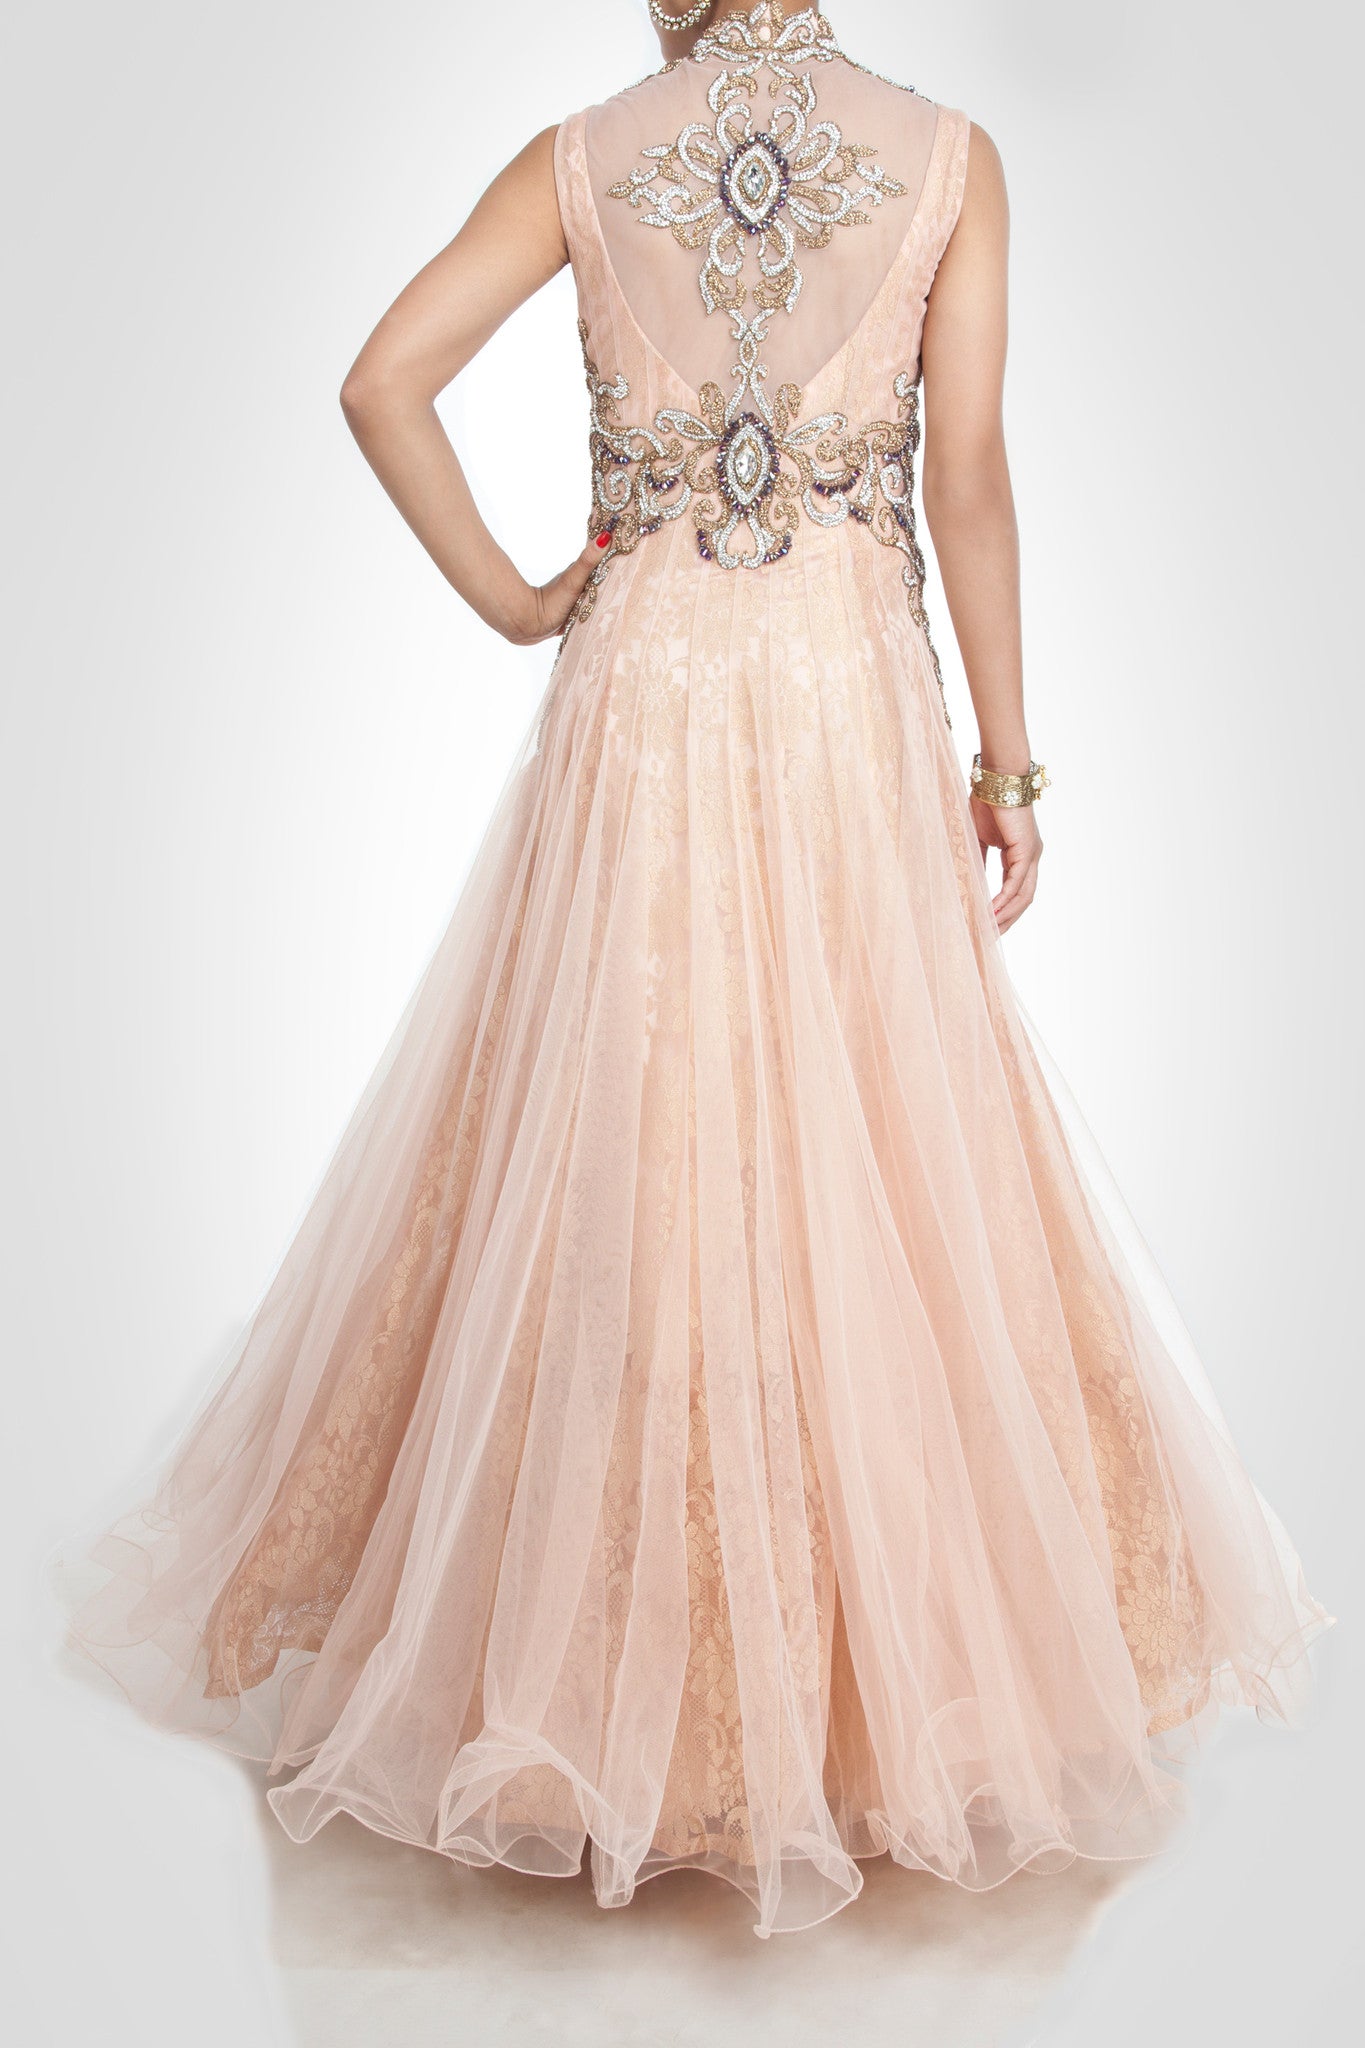 Peach color high-neck gown